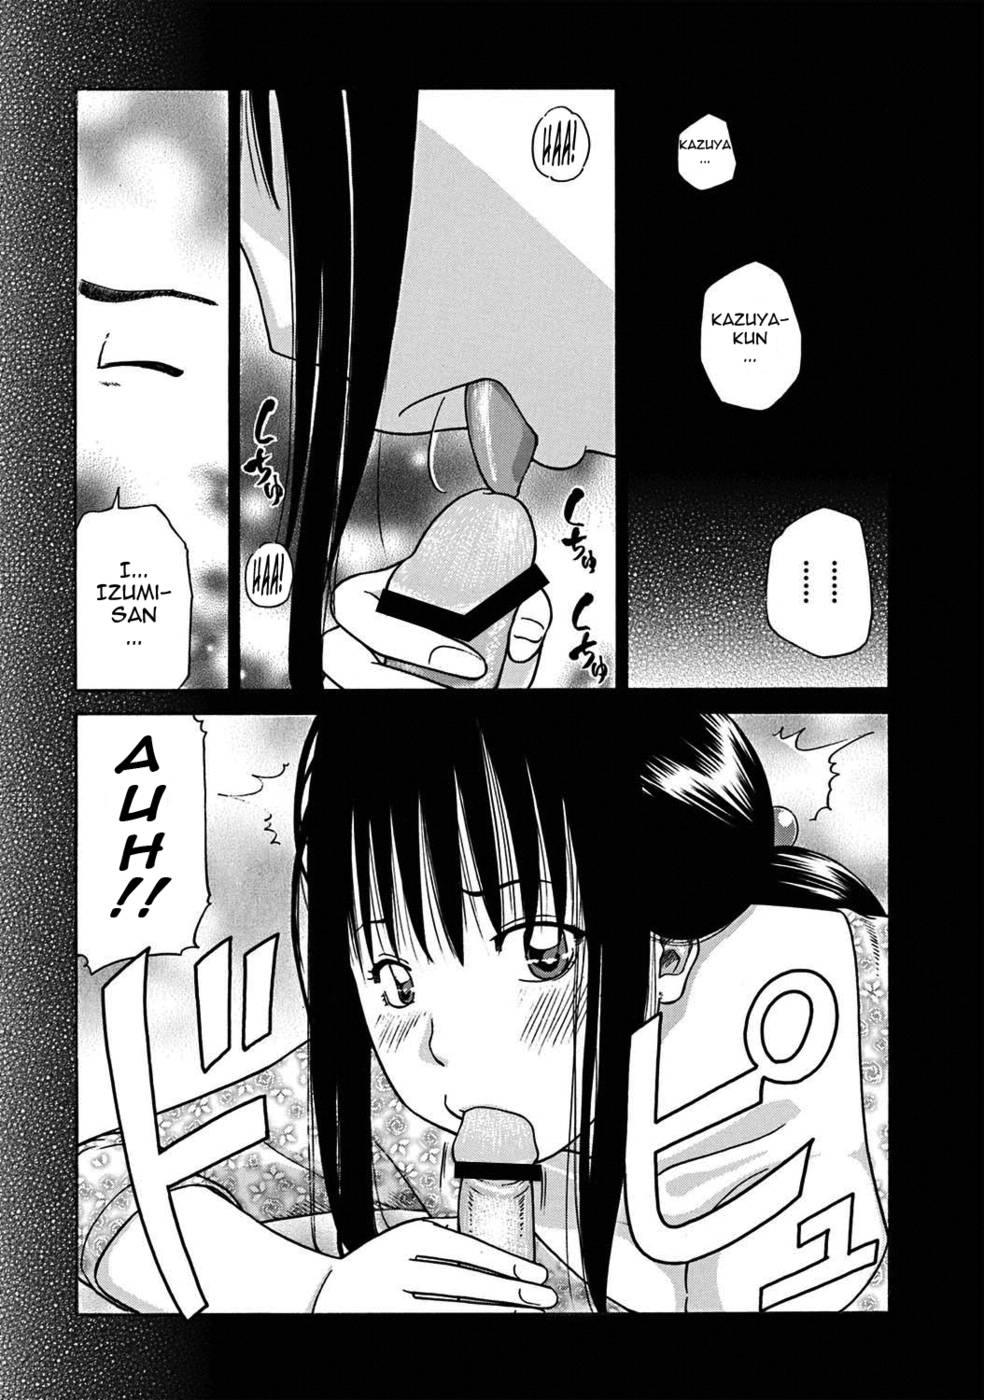 Hentai Manga Comic-33 Year Old Unsatisfied Wife-Chapter 10-Let's Just Do It-2